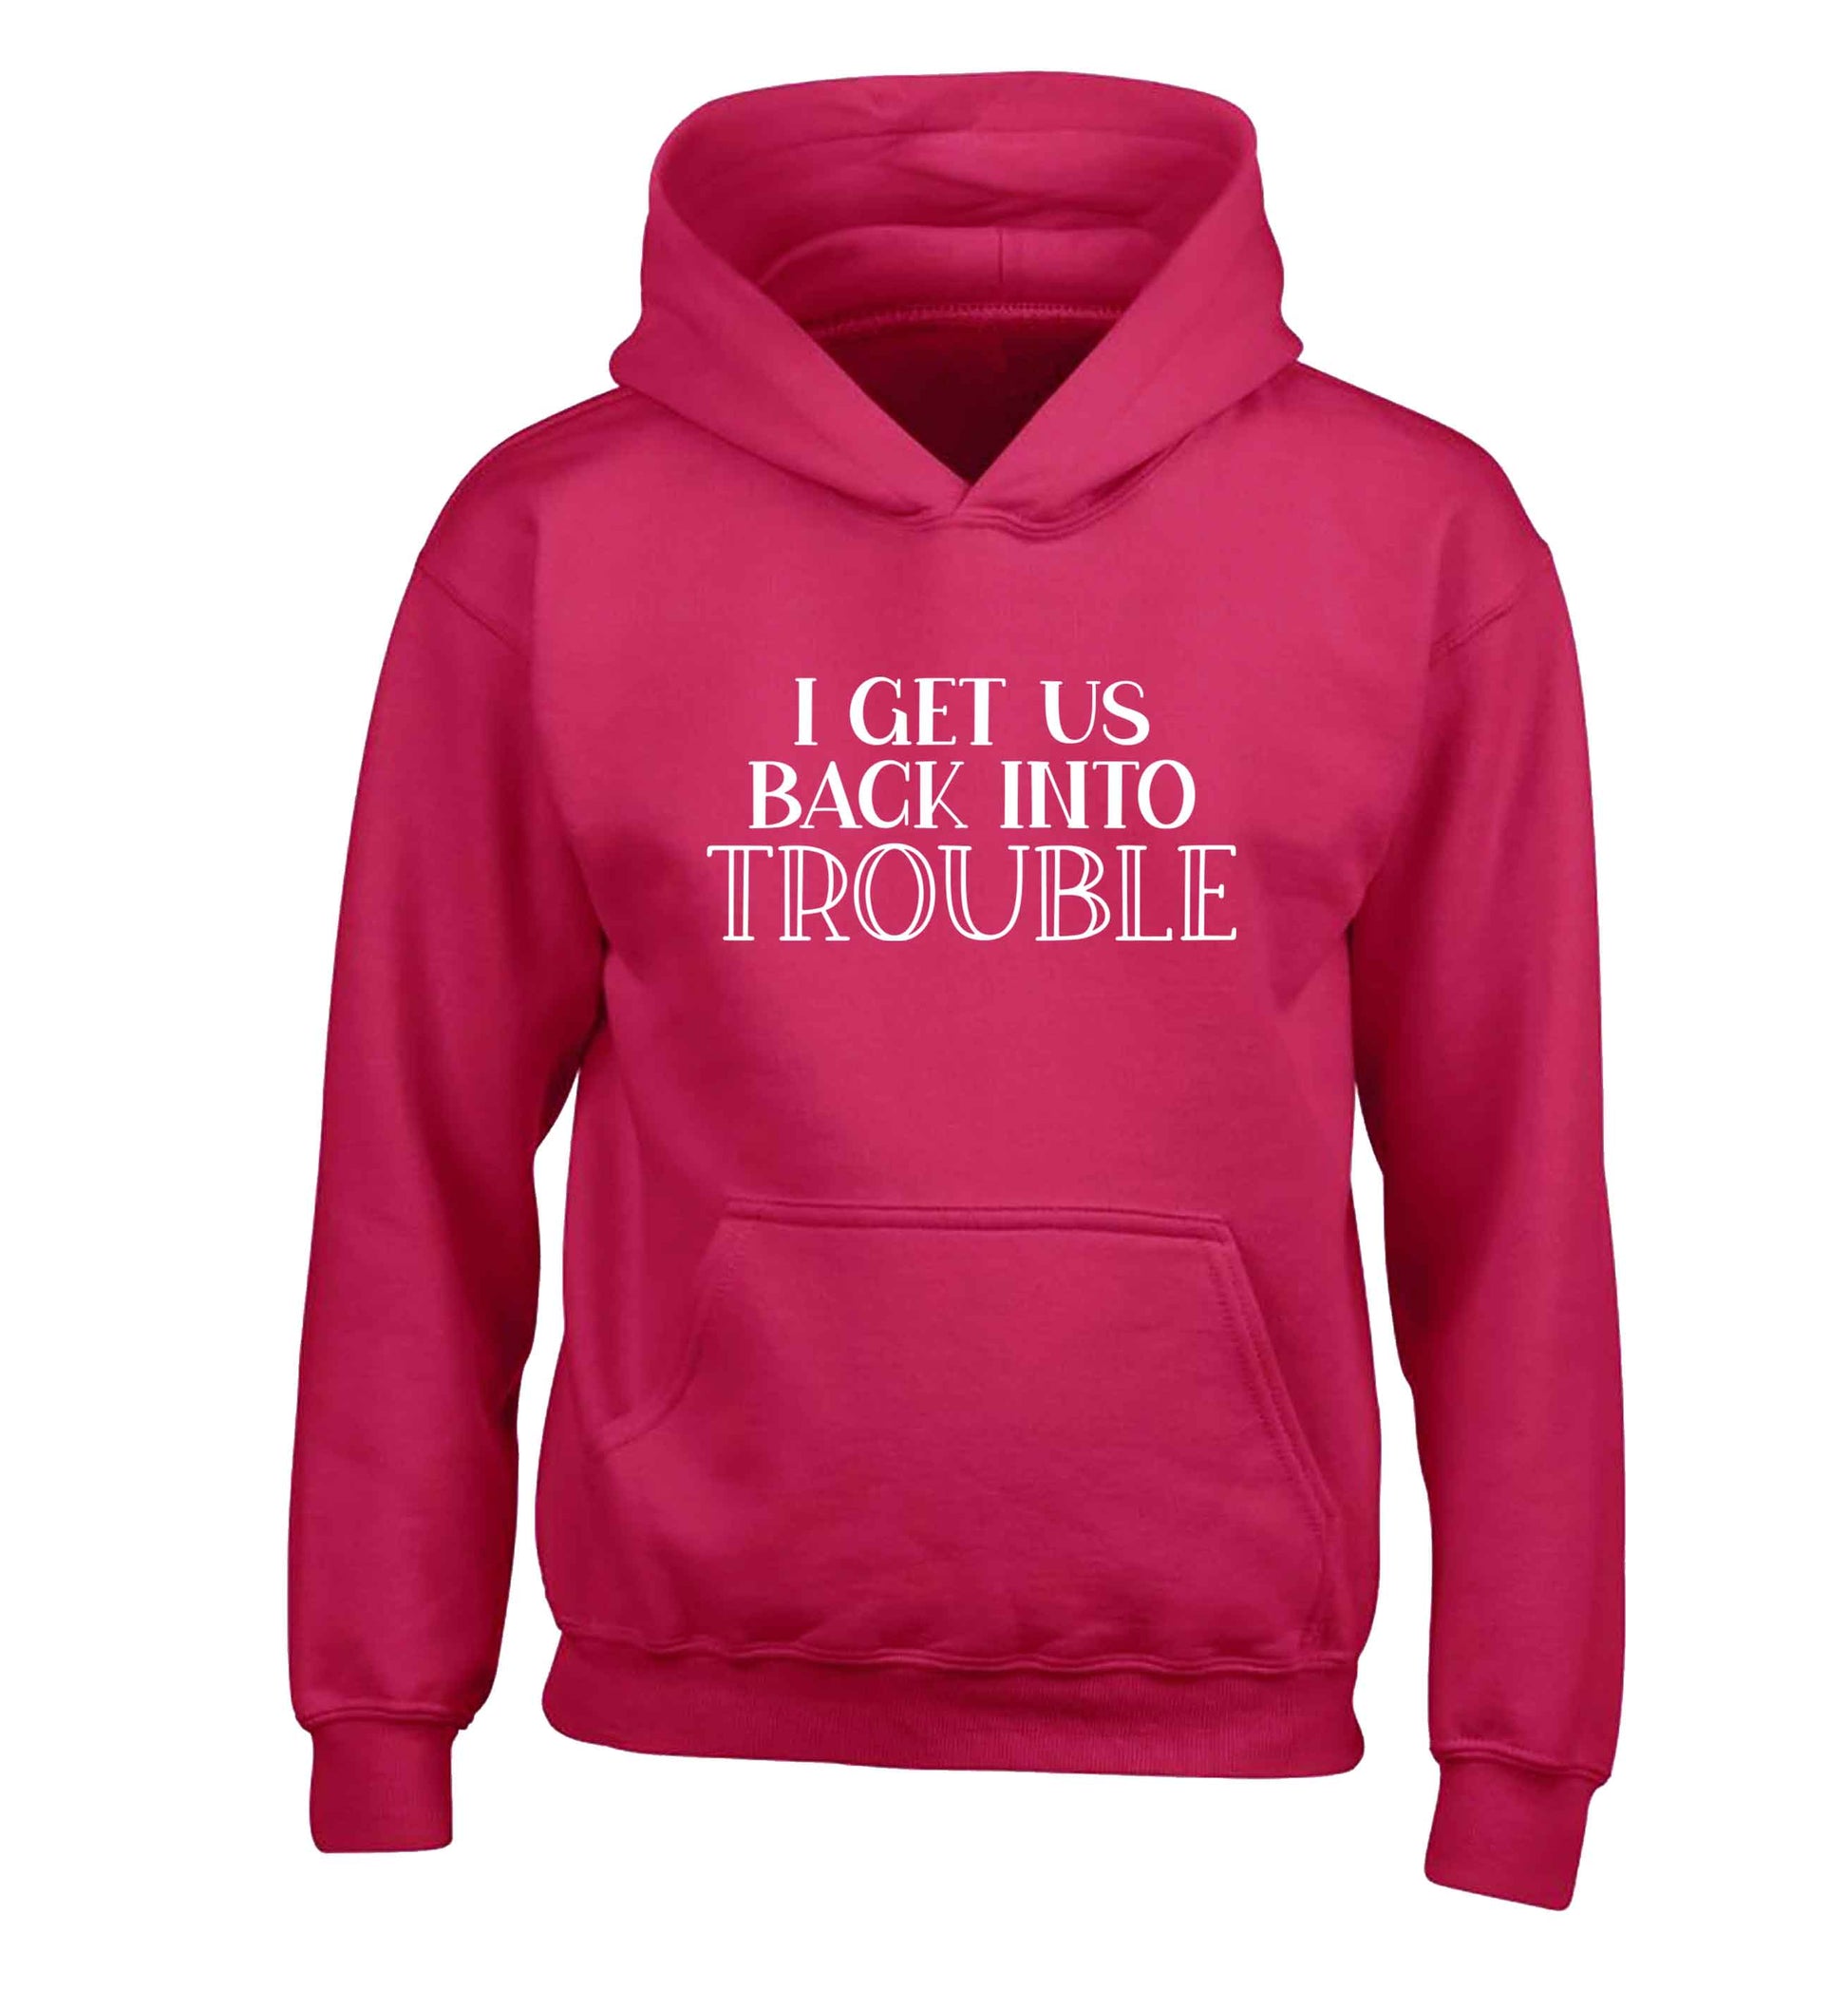 I get us back into trouble children's pink hoodie 12-13 Years